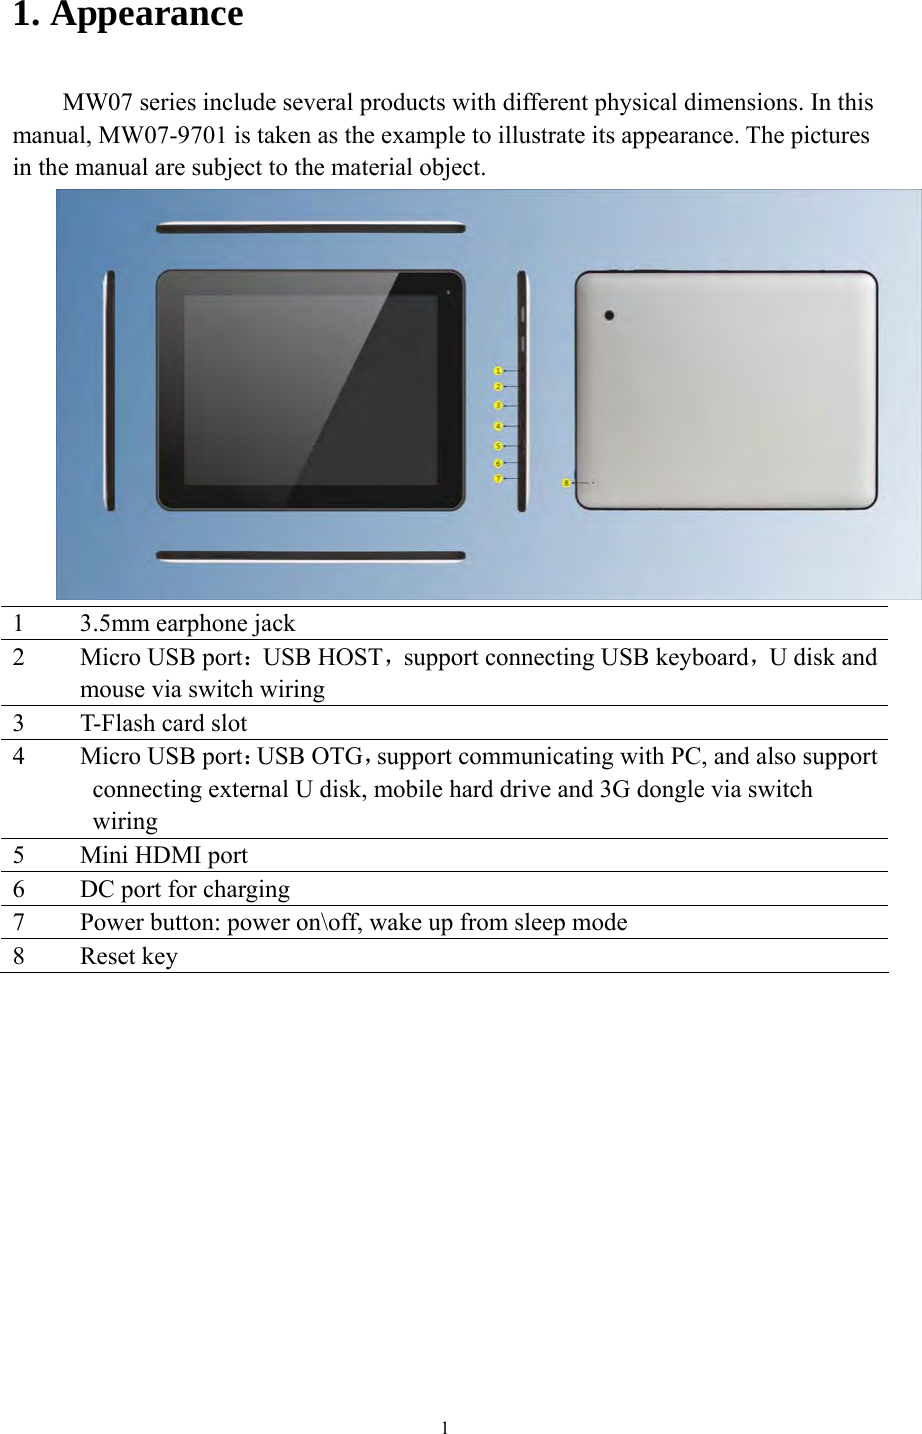 1 1. Appearance MW07 series include several products with different physical dimensions. In this manual, MW07-9701 is taken as the example to illustrate its appearance. The pictures in the manual are subject to the material object.    1  3.5mm earphone jack 2  Micro USB port：USB HOST，support connecting USB keyboard，U disk and mouse via switch wiring 3  T-Flash card slot   4  Micro USB port：USB OTG，support communicating with PC, and also support connecting external U disk, mobile hard drive and 3G dongle via switch wiring 5 Mini HDMI port 6  DC port for charging   7  Power button: power on\off, wake up from sleep mode   8 Reset key   